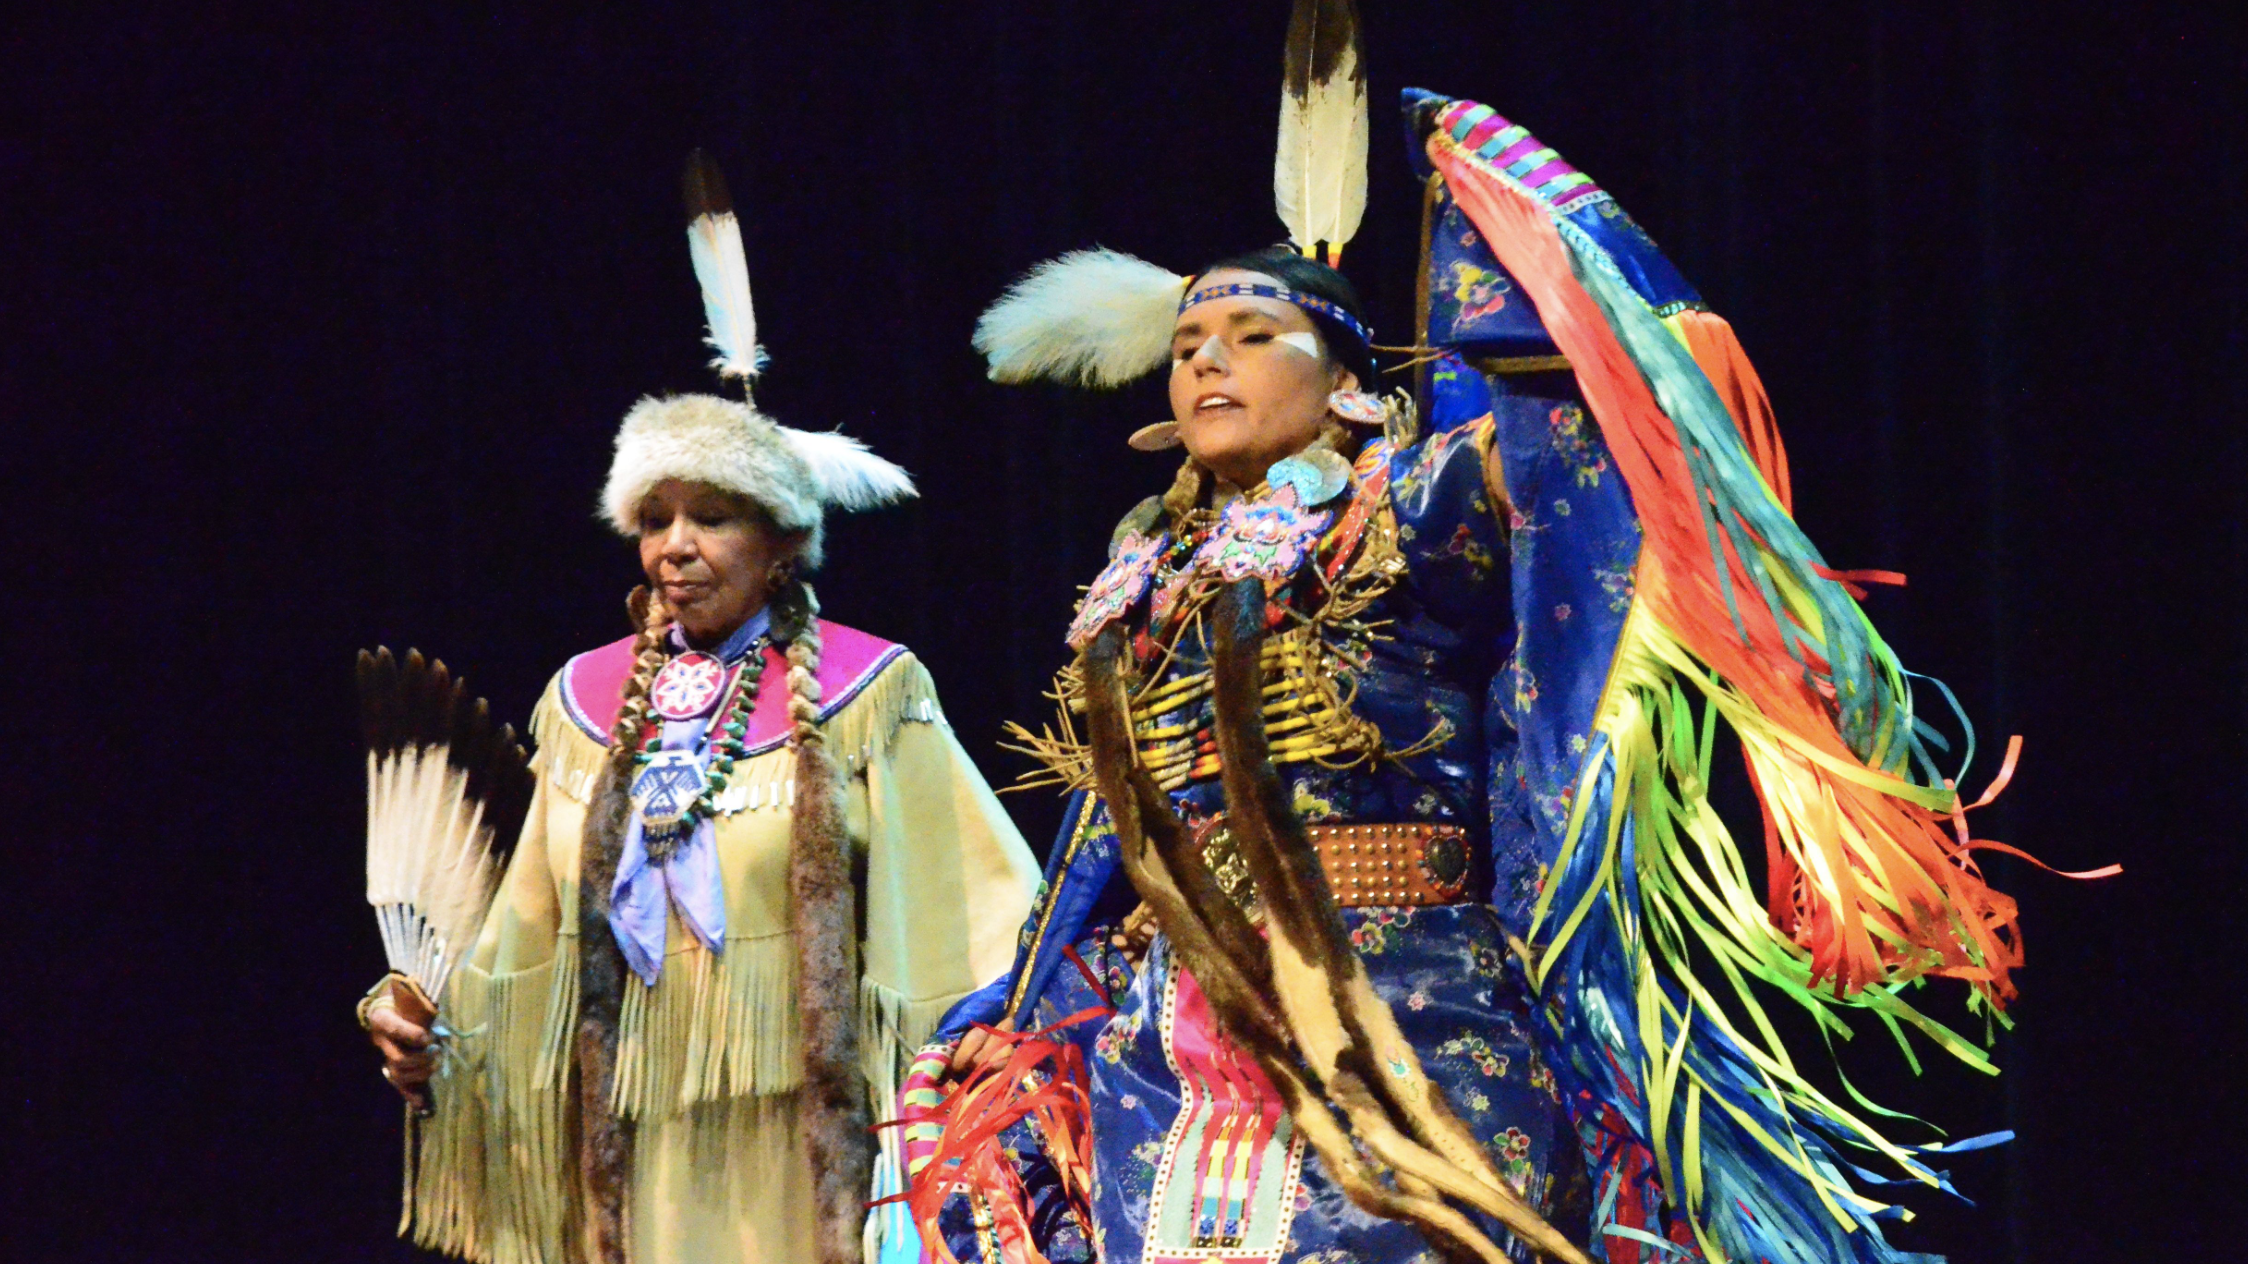 Big Read Brings Native American Voices & Culture to LSSU. Linda Batiste-Cohen and Michelle Reed performing in 2021.